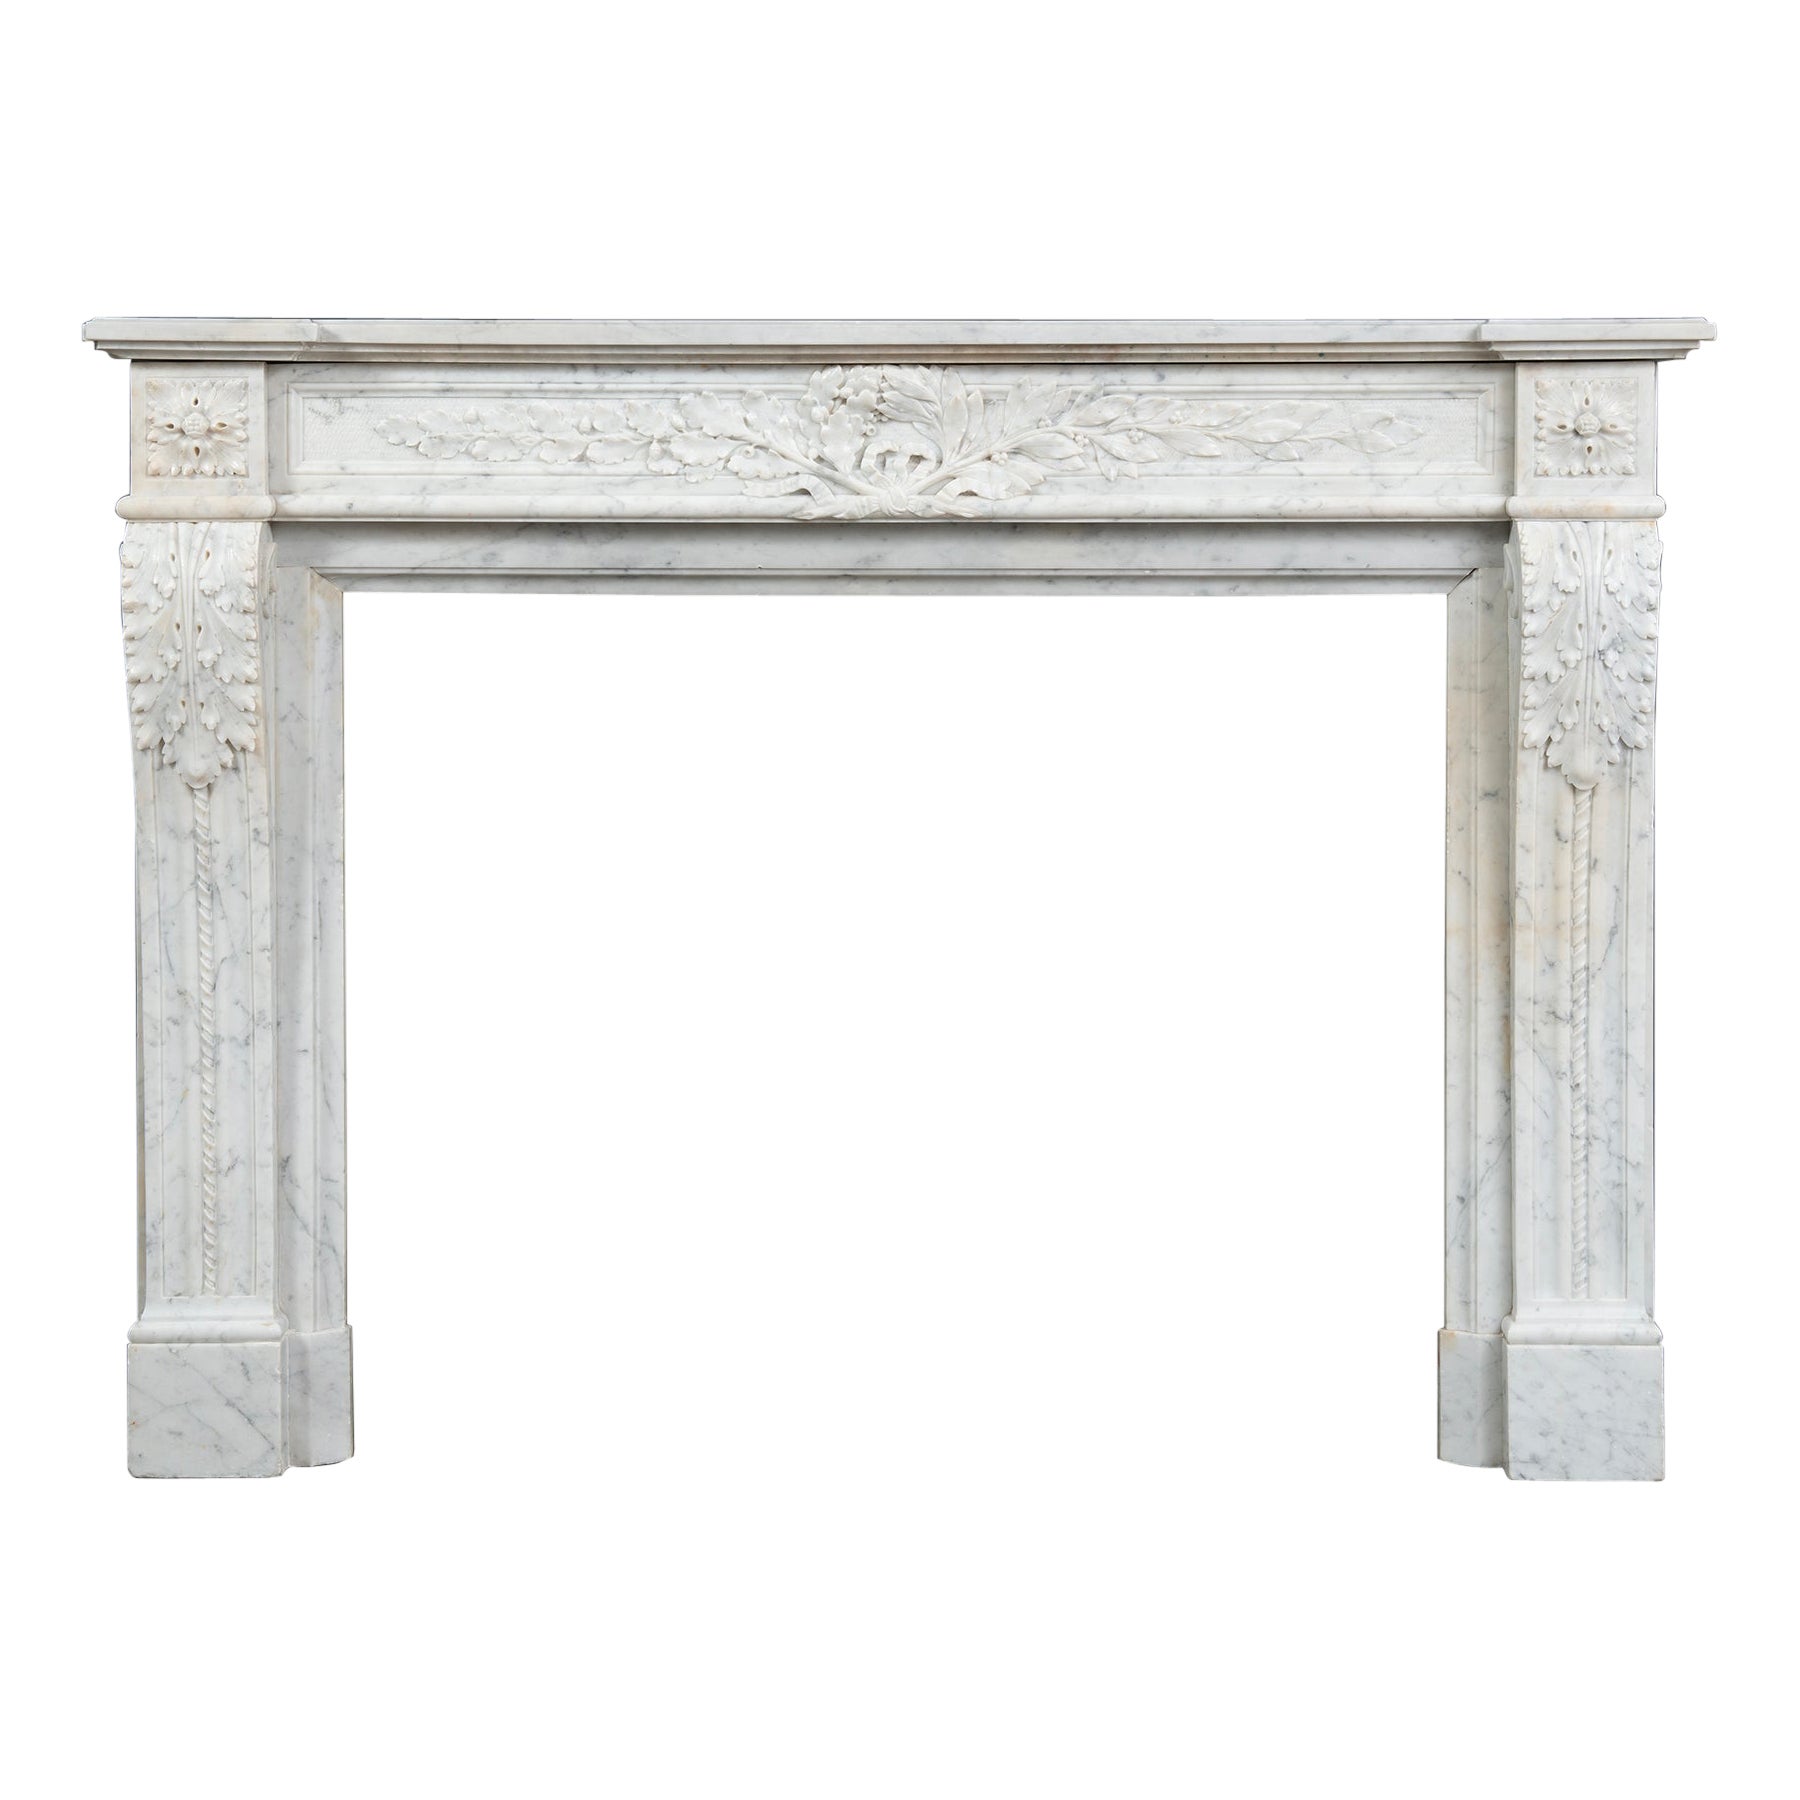 Antique Fireplace Mantel in Louis XVI Style For Sale